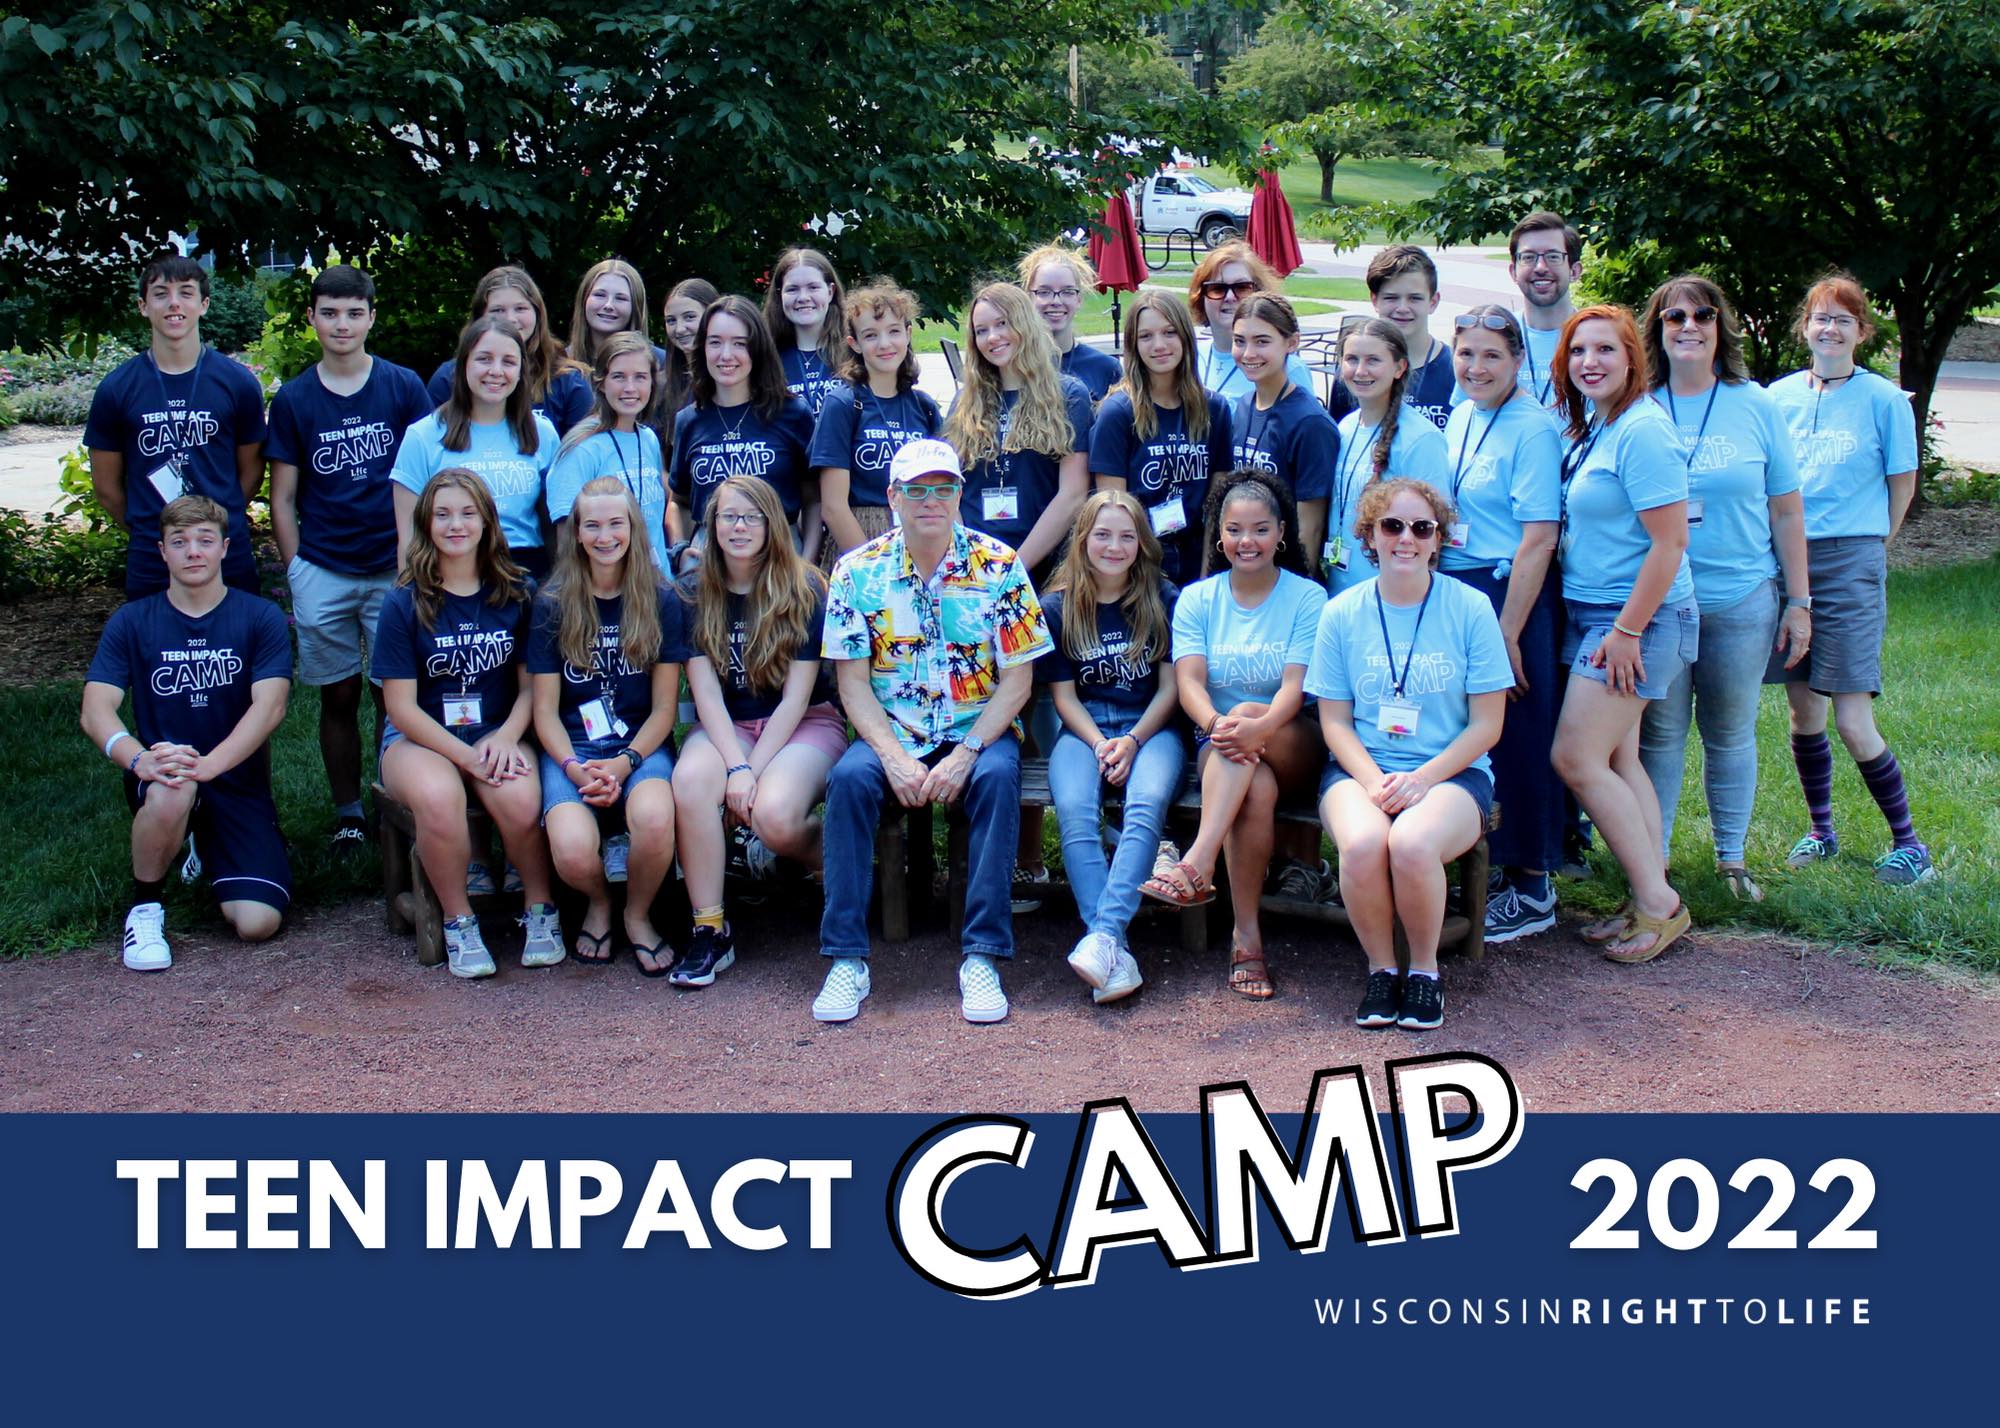 naam rivaal Verdorren Teen Impact Camp 2022: A Look at the Annual Week of Pro-Life and Fun Times  - Wisconsin Right to Life